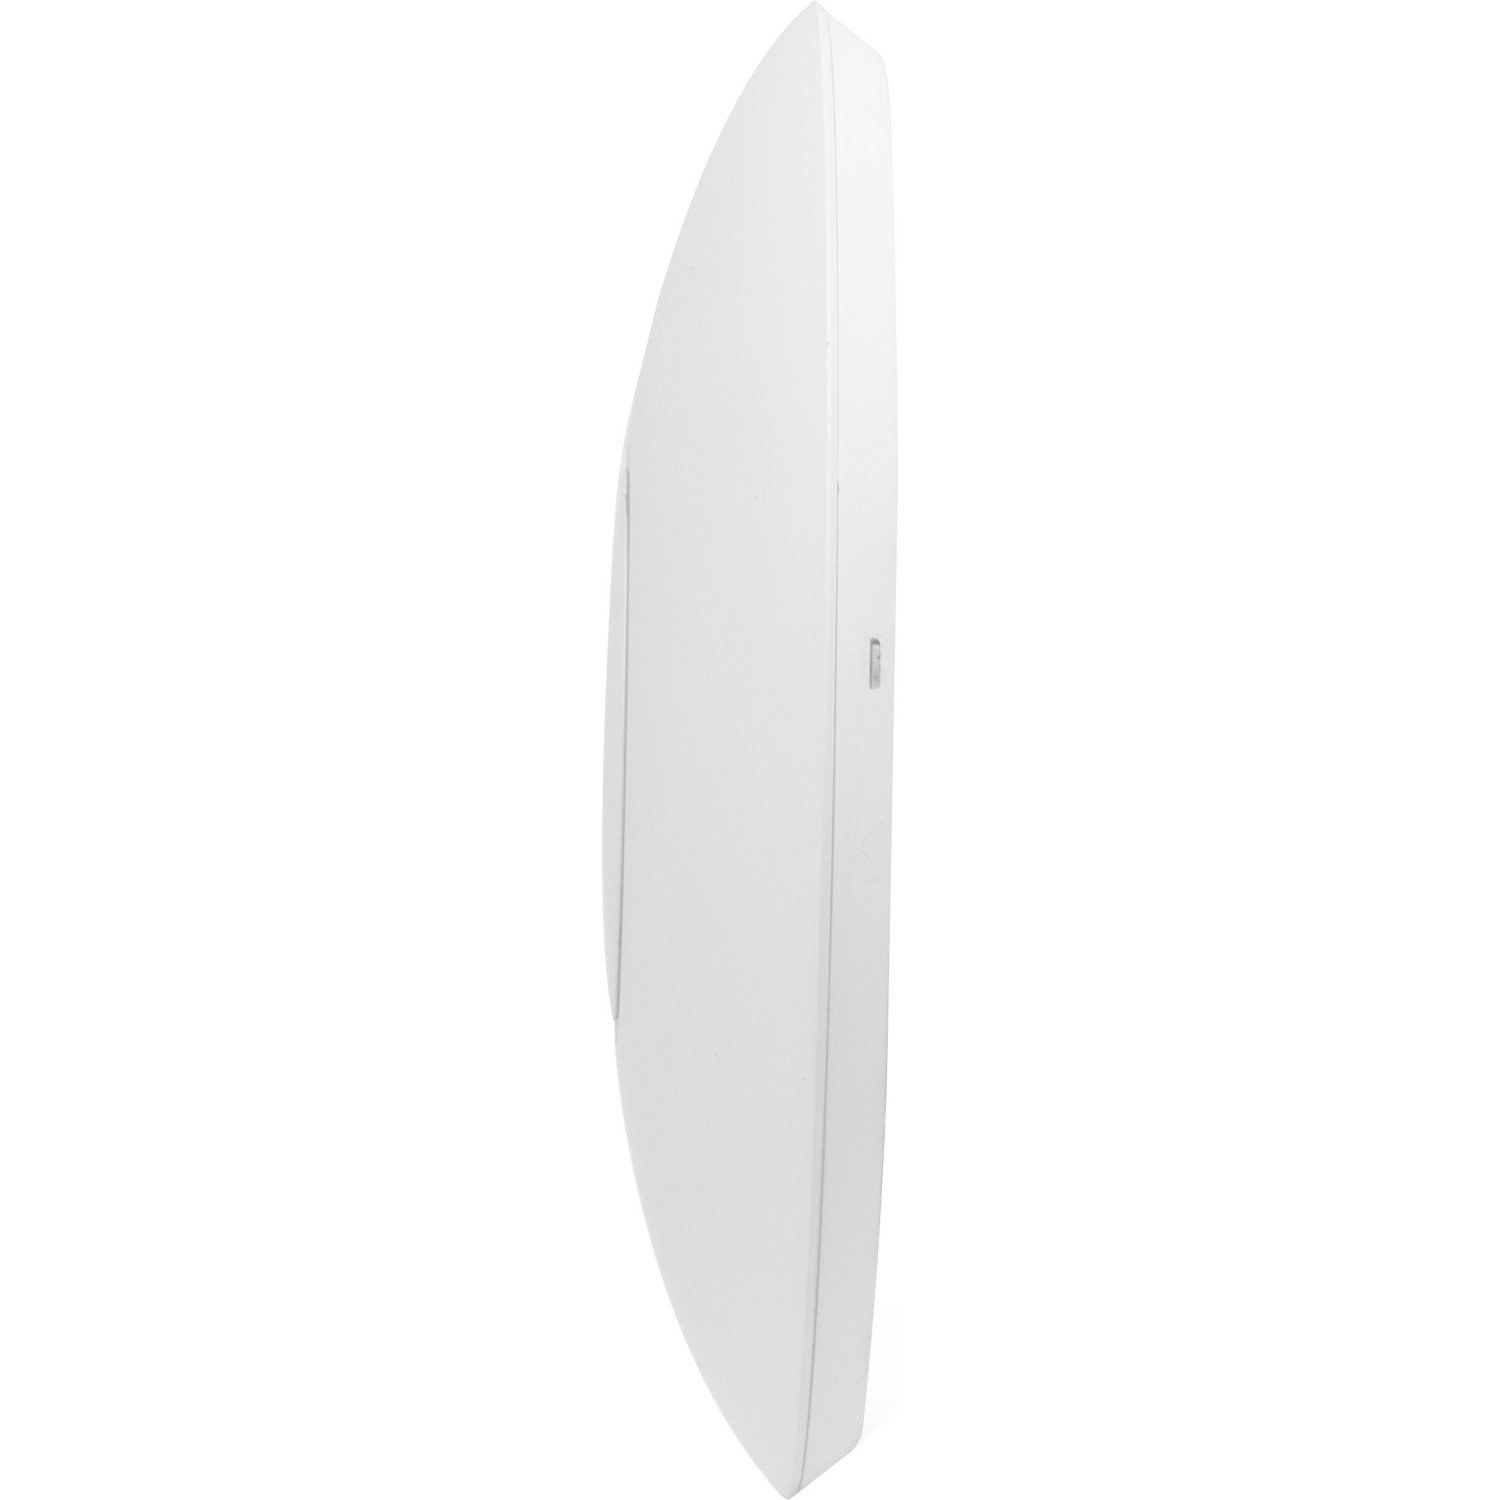 Ubiquiti UniFi Ac Pro V2 Indoor & Outdoor Access Point, 2.4GHz @ 450Mbps, 5GHz @ 1300Mbps, 1750Mbps Total, Range Up To 122M